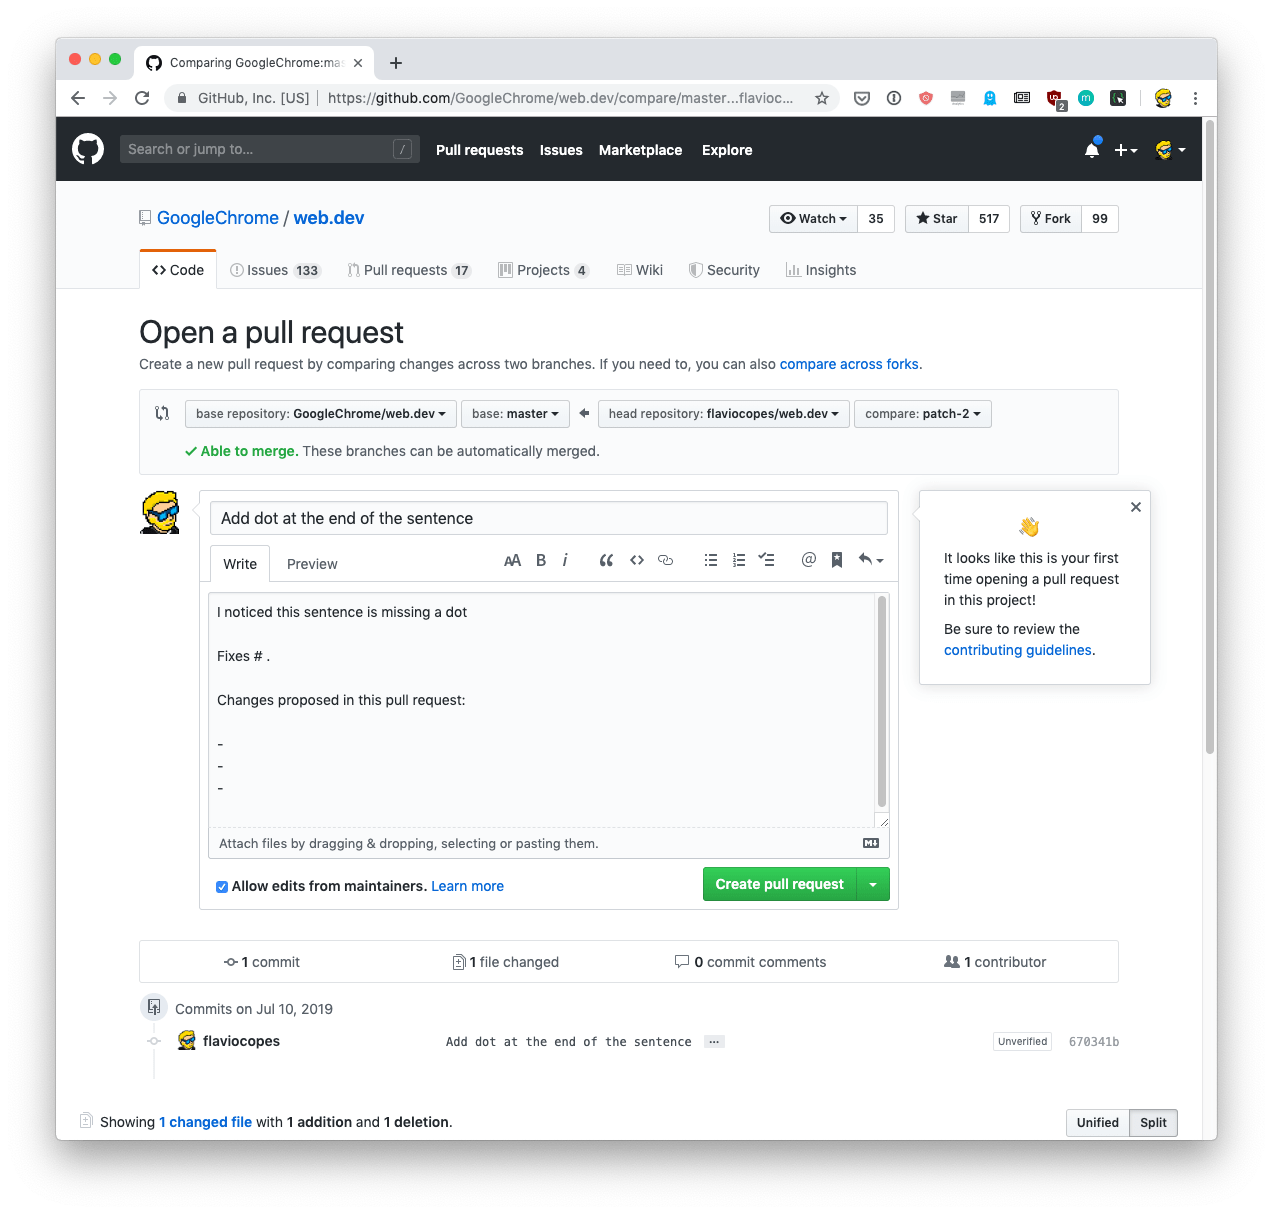 Open pull request